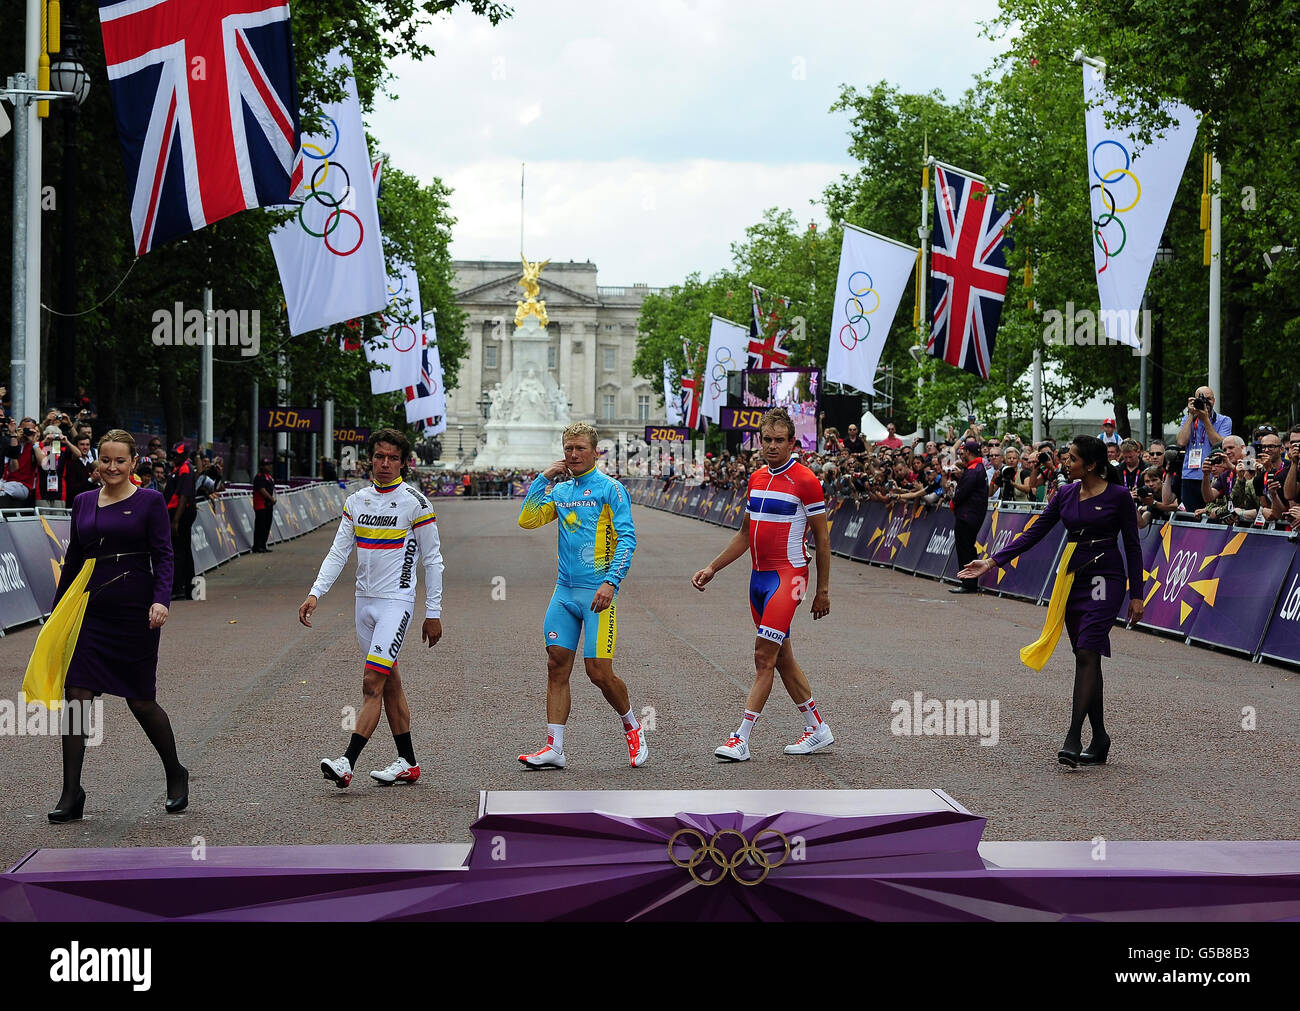 Kazakhstan's Alexandr Vinolurov walks out to collect his Gold medal alongside second placed Rigoberto Uran Uran and third placed Norway's Alexander Kristoff following the Men's Road Race in the Mall, London. Stock Photo